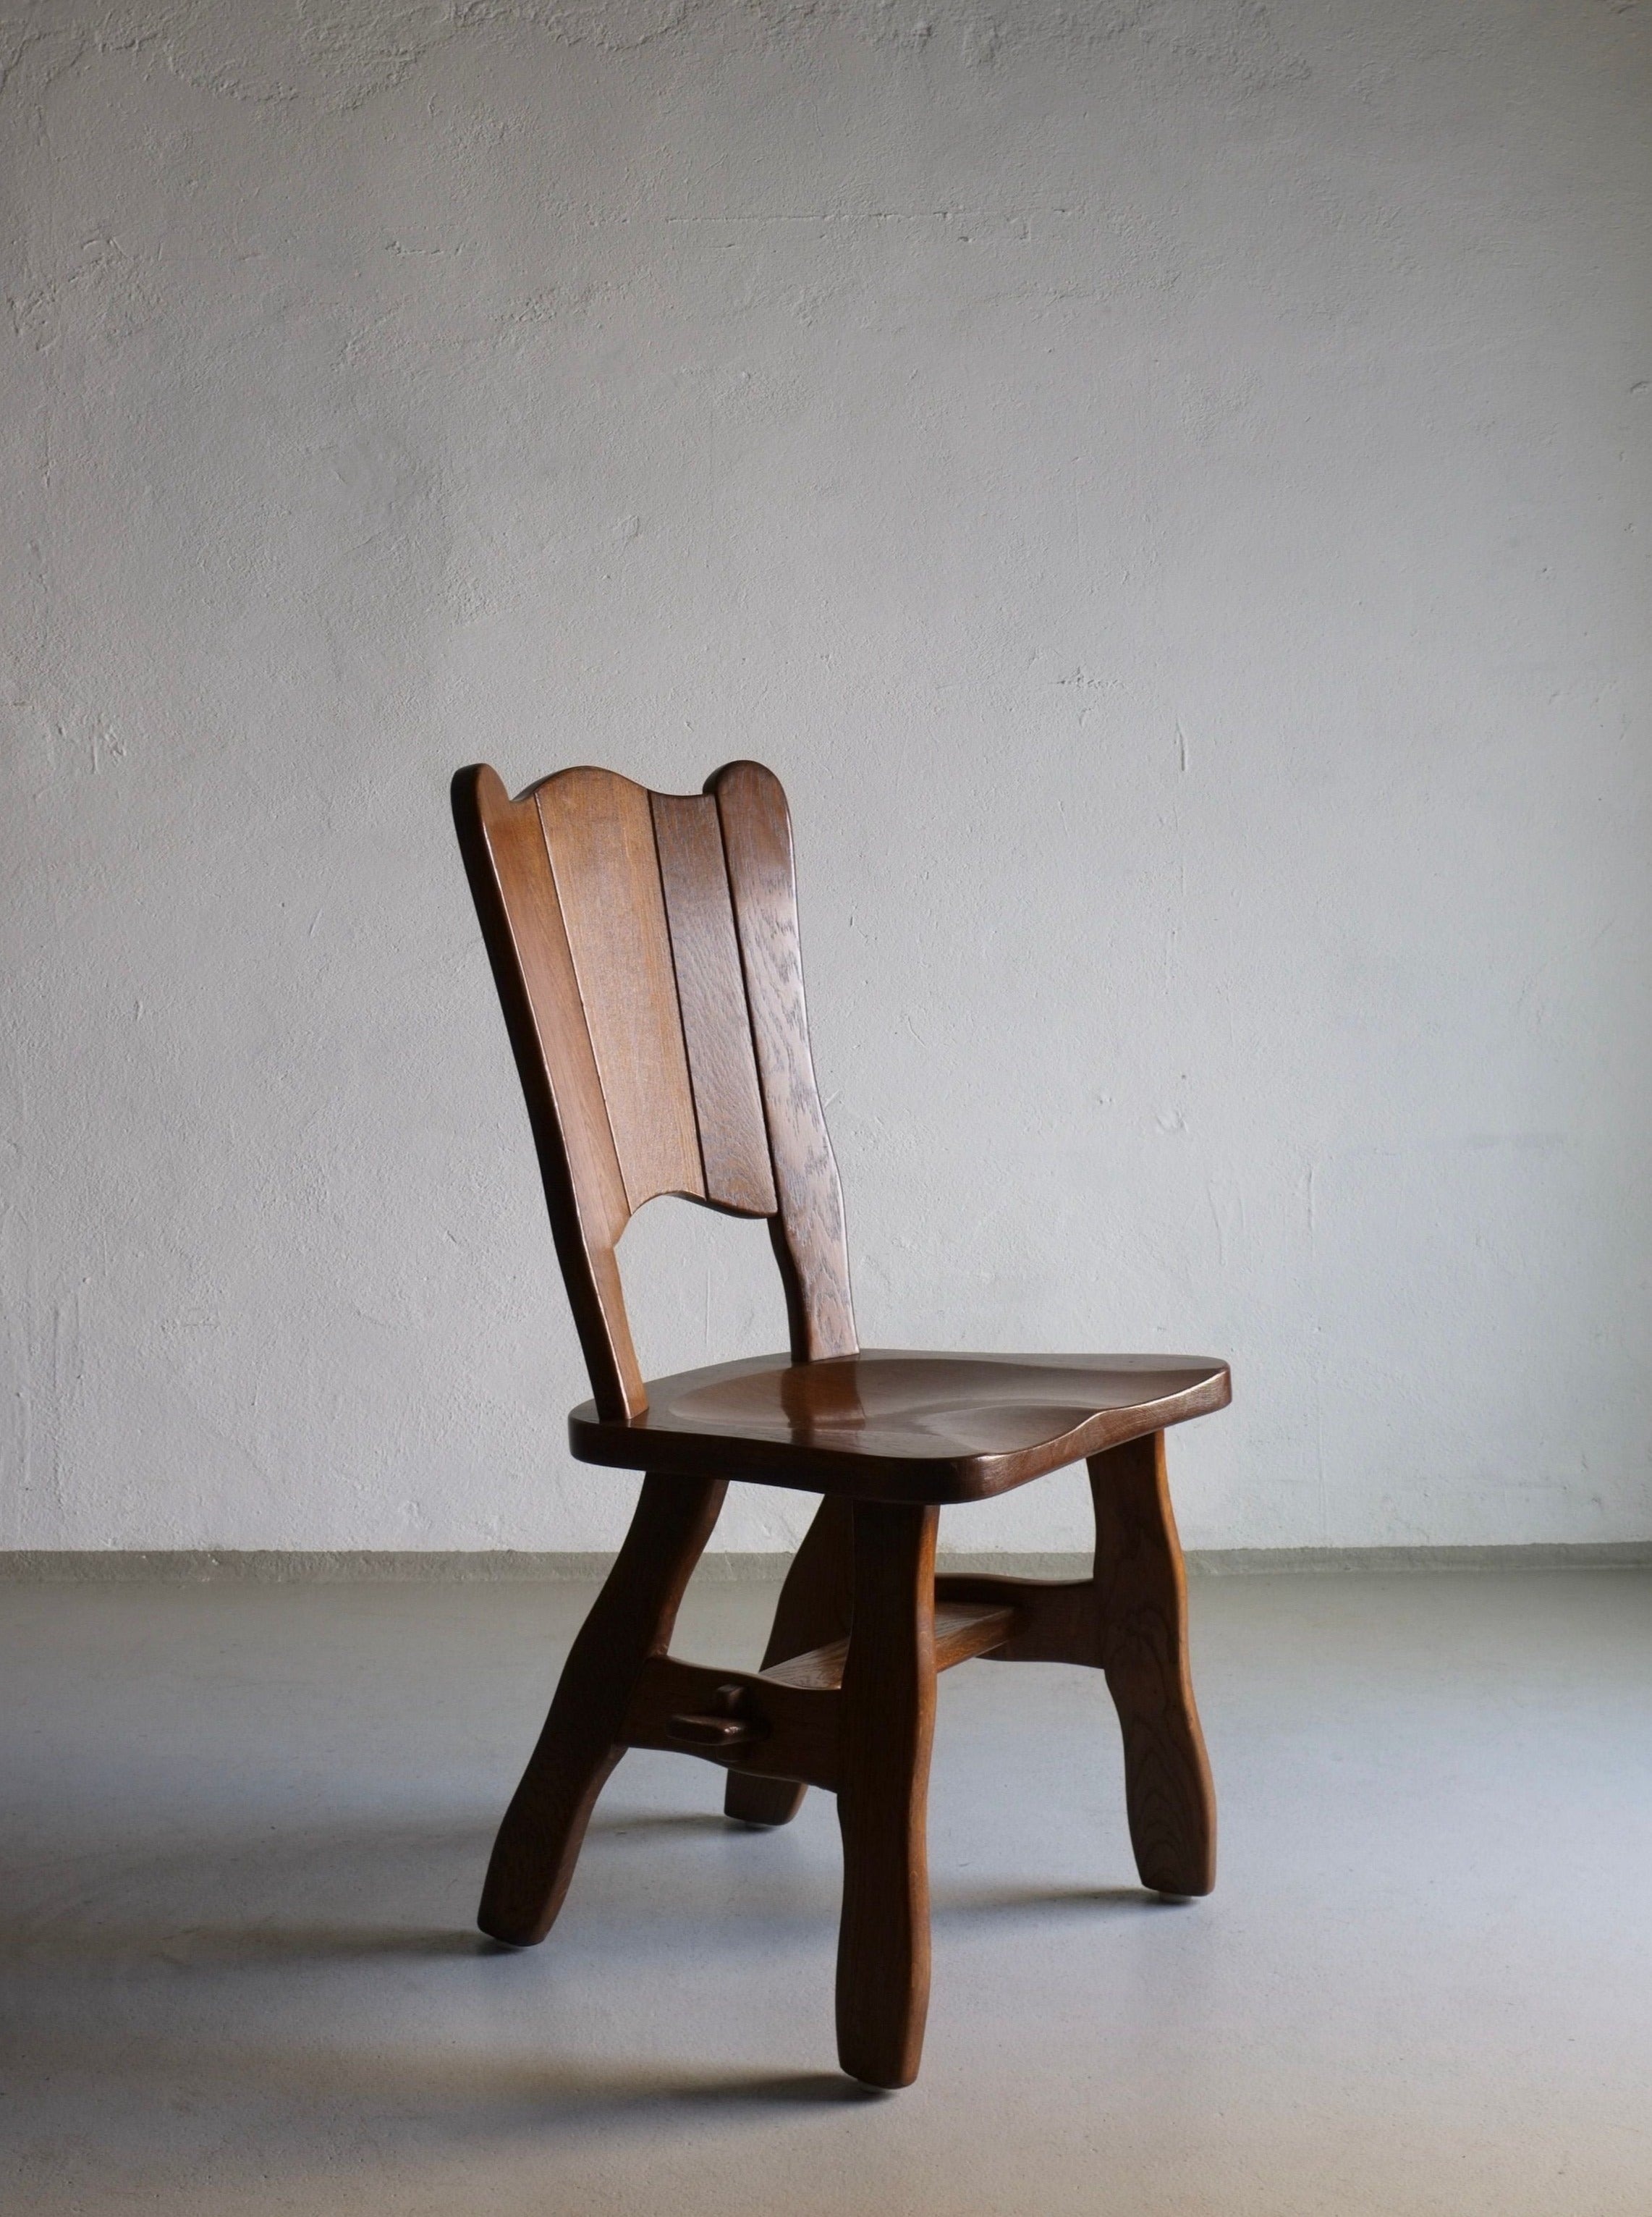 2 Brutalist Solid Oak Chair 1970s